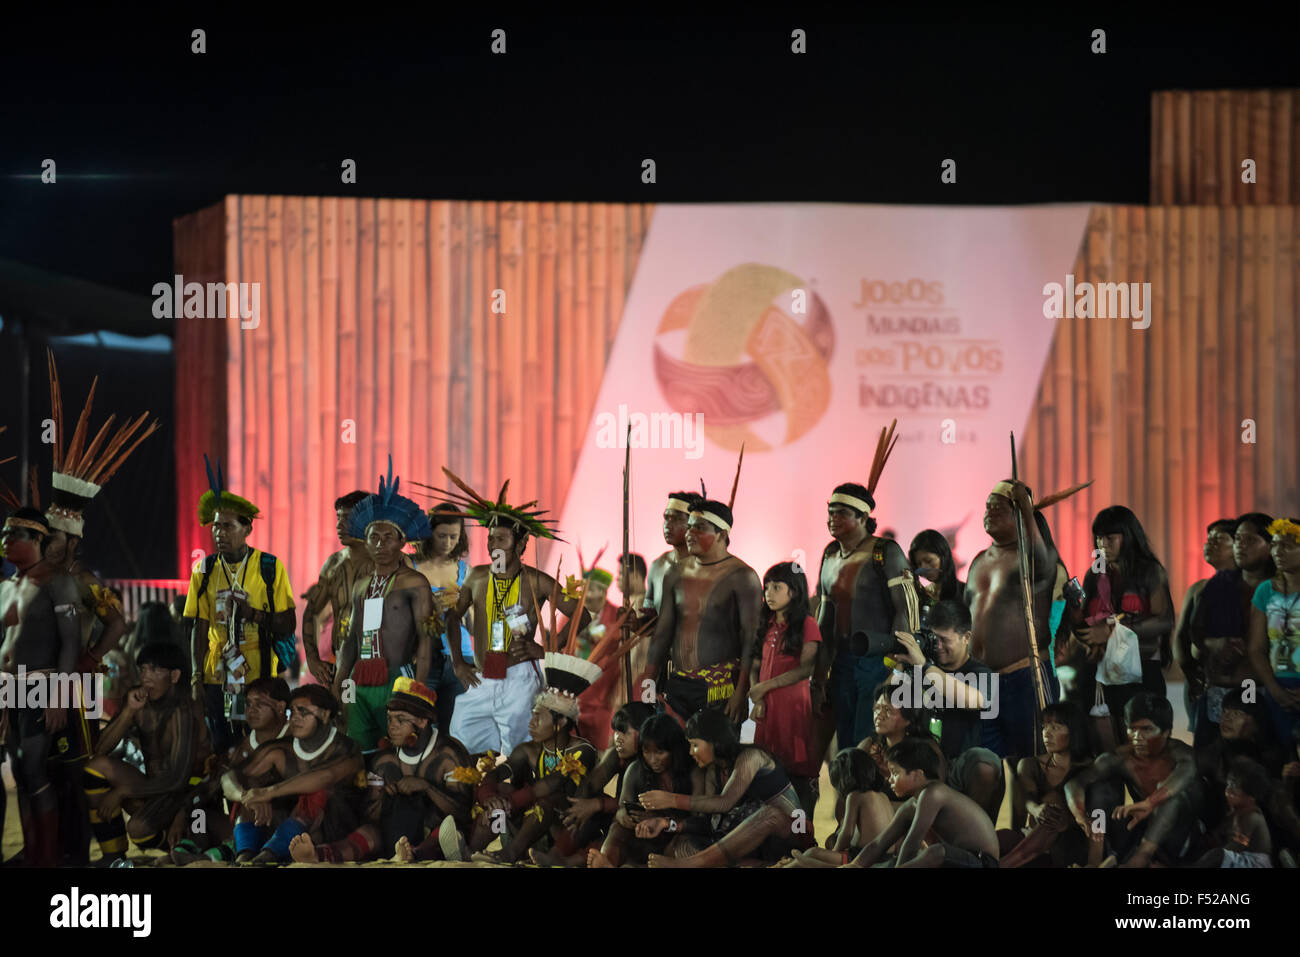 Palmas, Tocantins State, Brazil. 25th October, 2015. Indigenous people from many ethicities watch the contests during the International Indigenous Games, in the city of Palmas, Tocantins State, Brazil. Credit:  Sue Cunningham Photographic/Alamy Live News Stock Photo